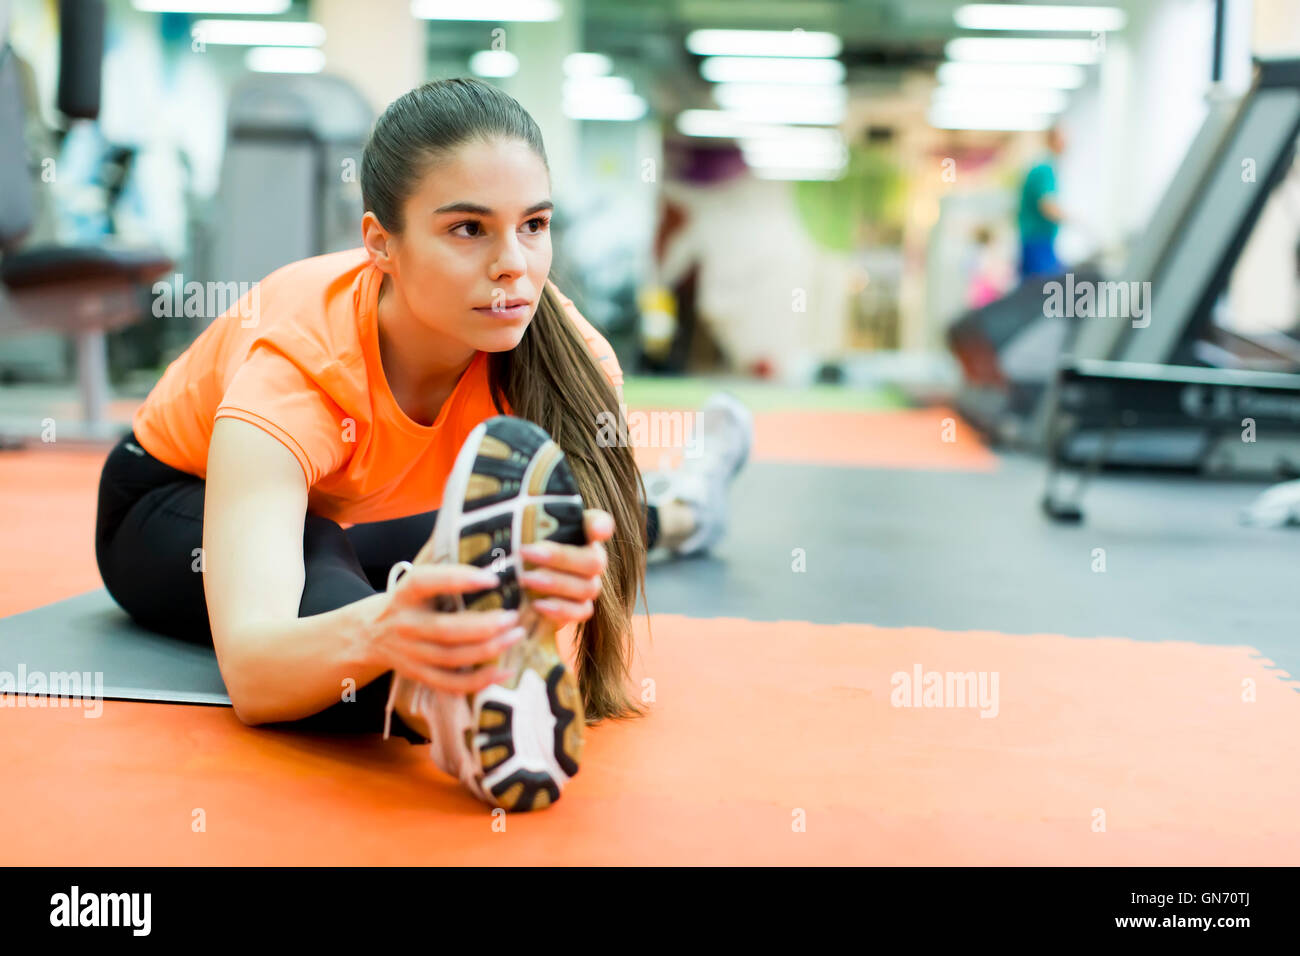 Young woman doing stretching exercises at the fitness center Stock Photo